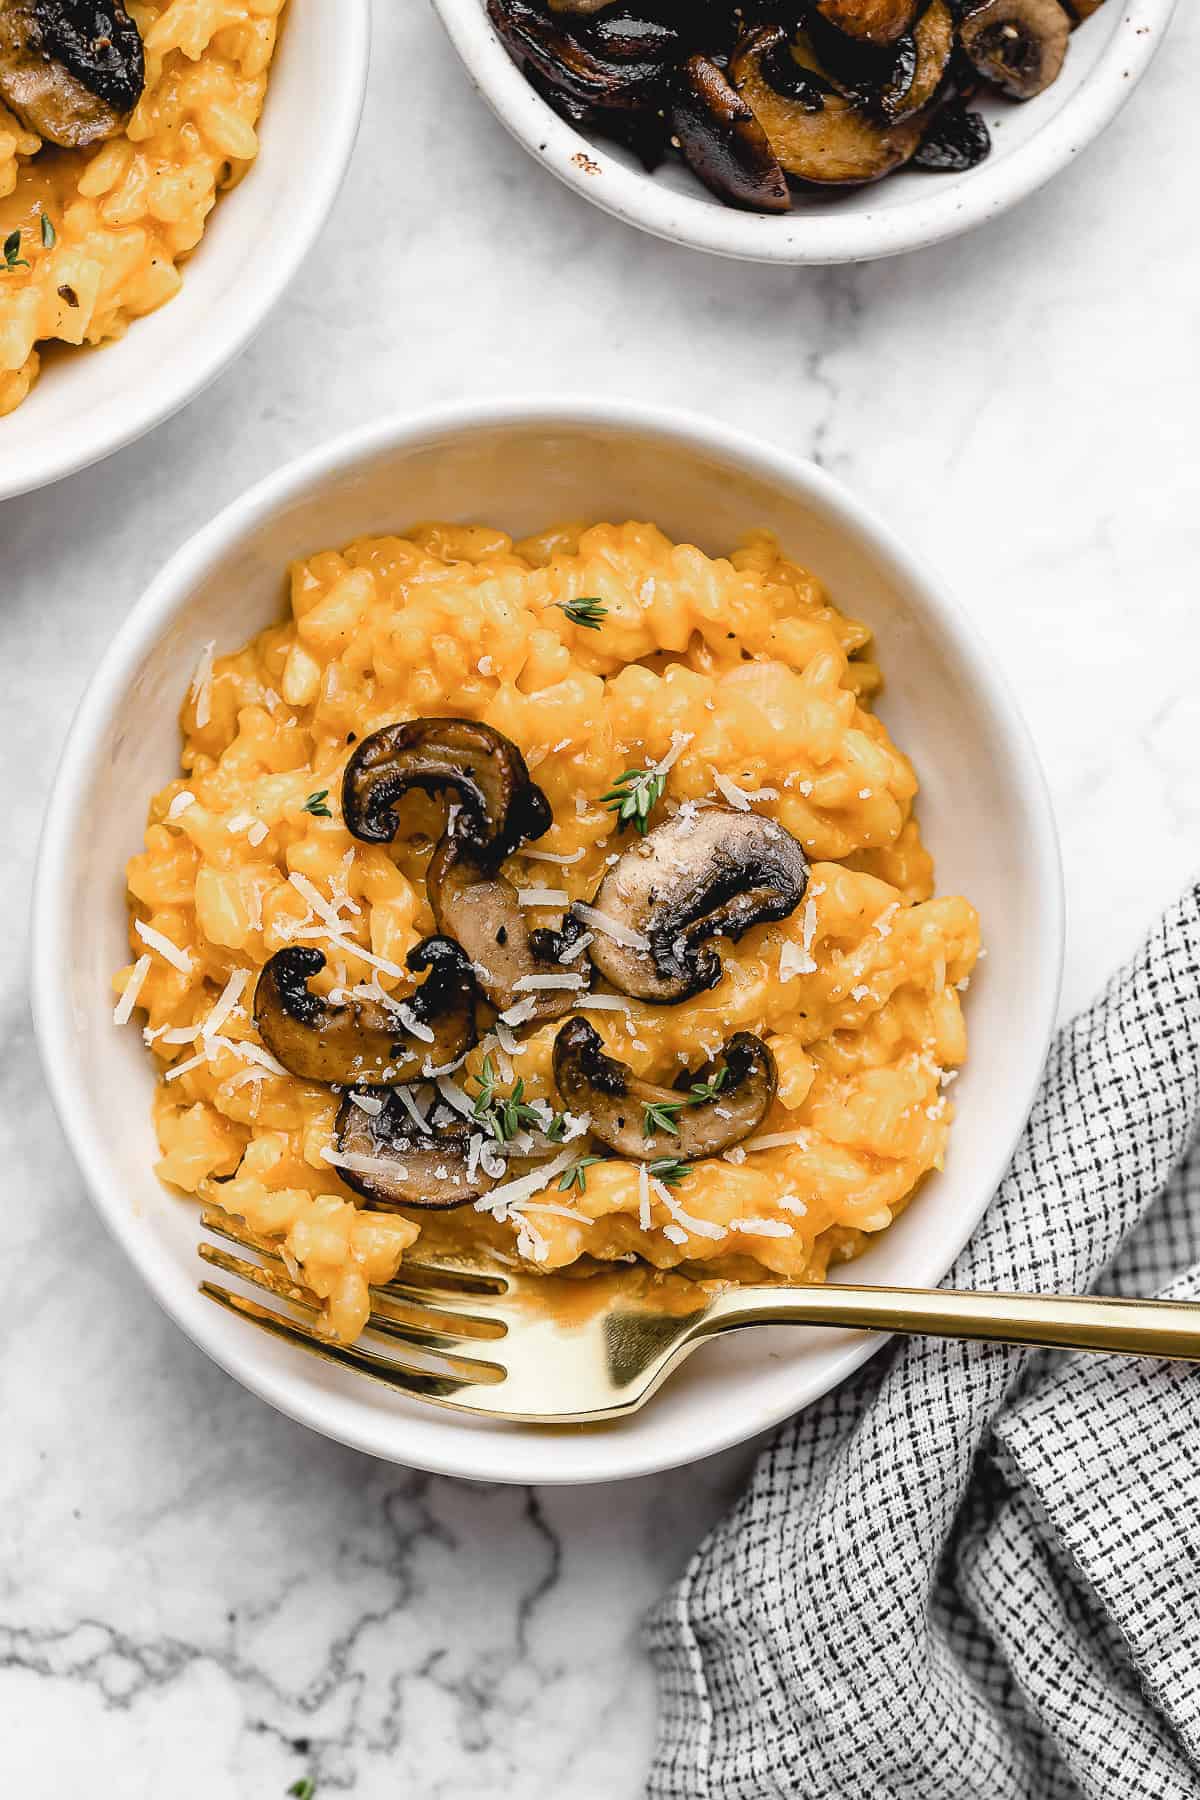 Vegan risotto in a bowl with mushrooms.